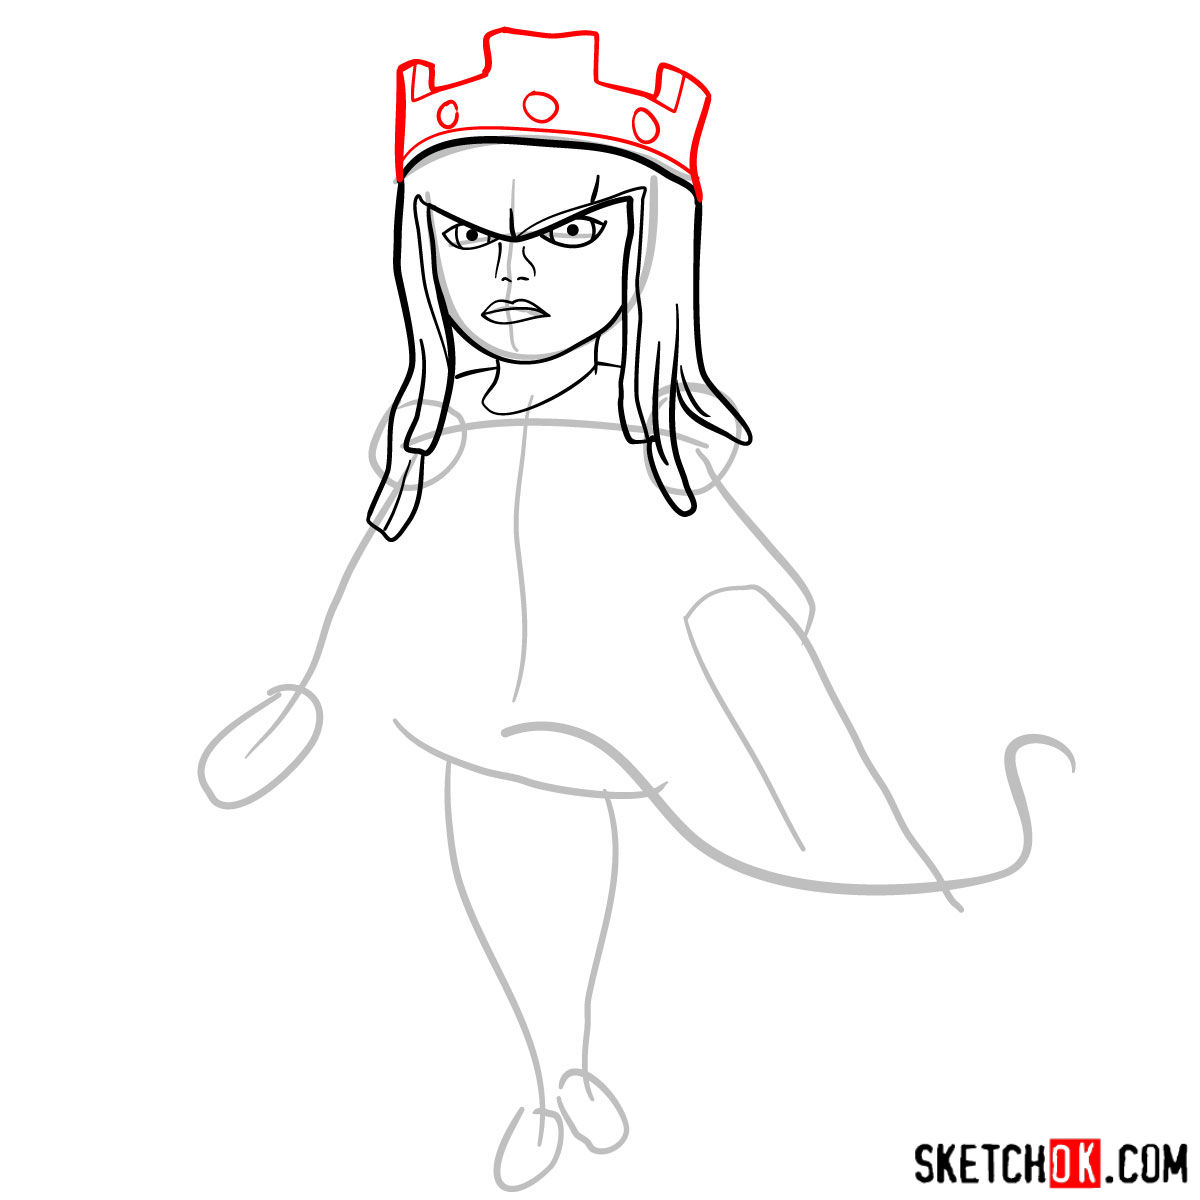 How to draw Archer Queen from Clash of Clans game - step 05